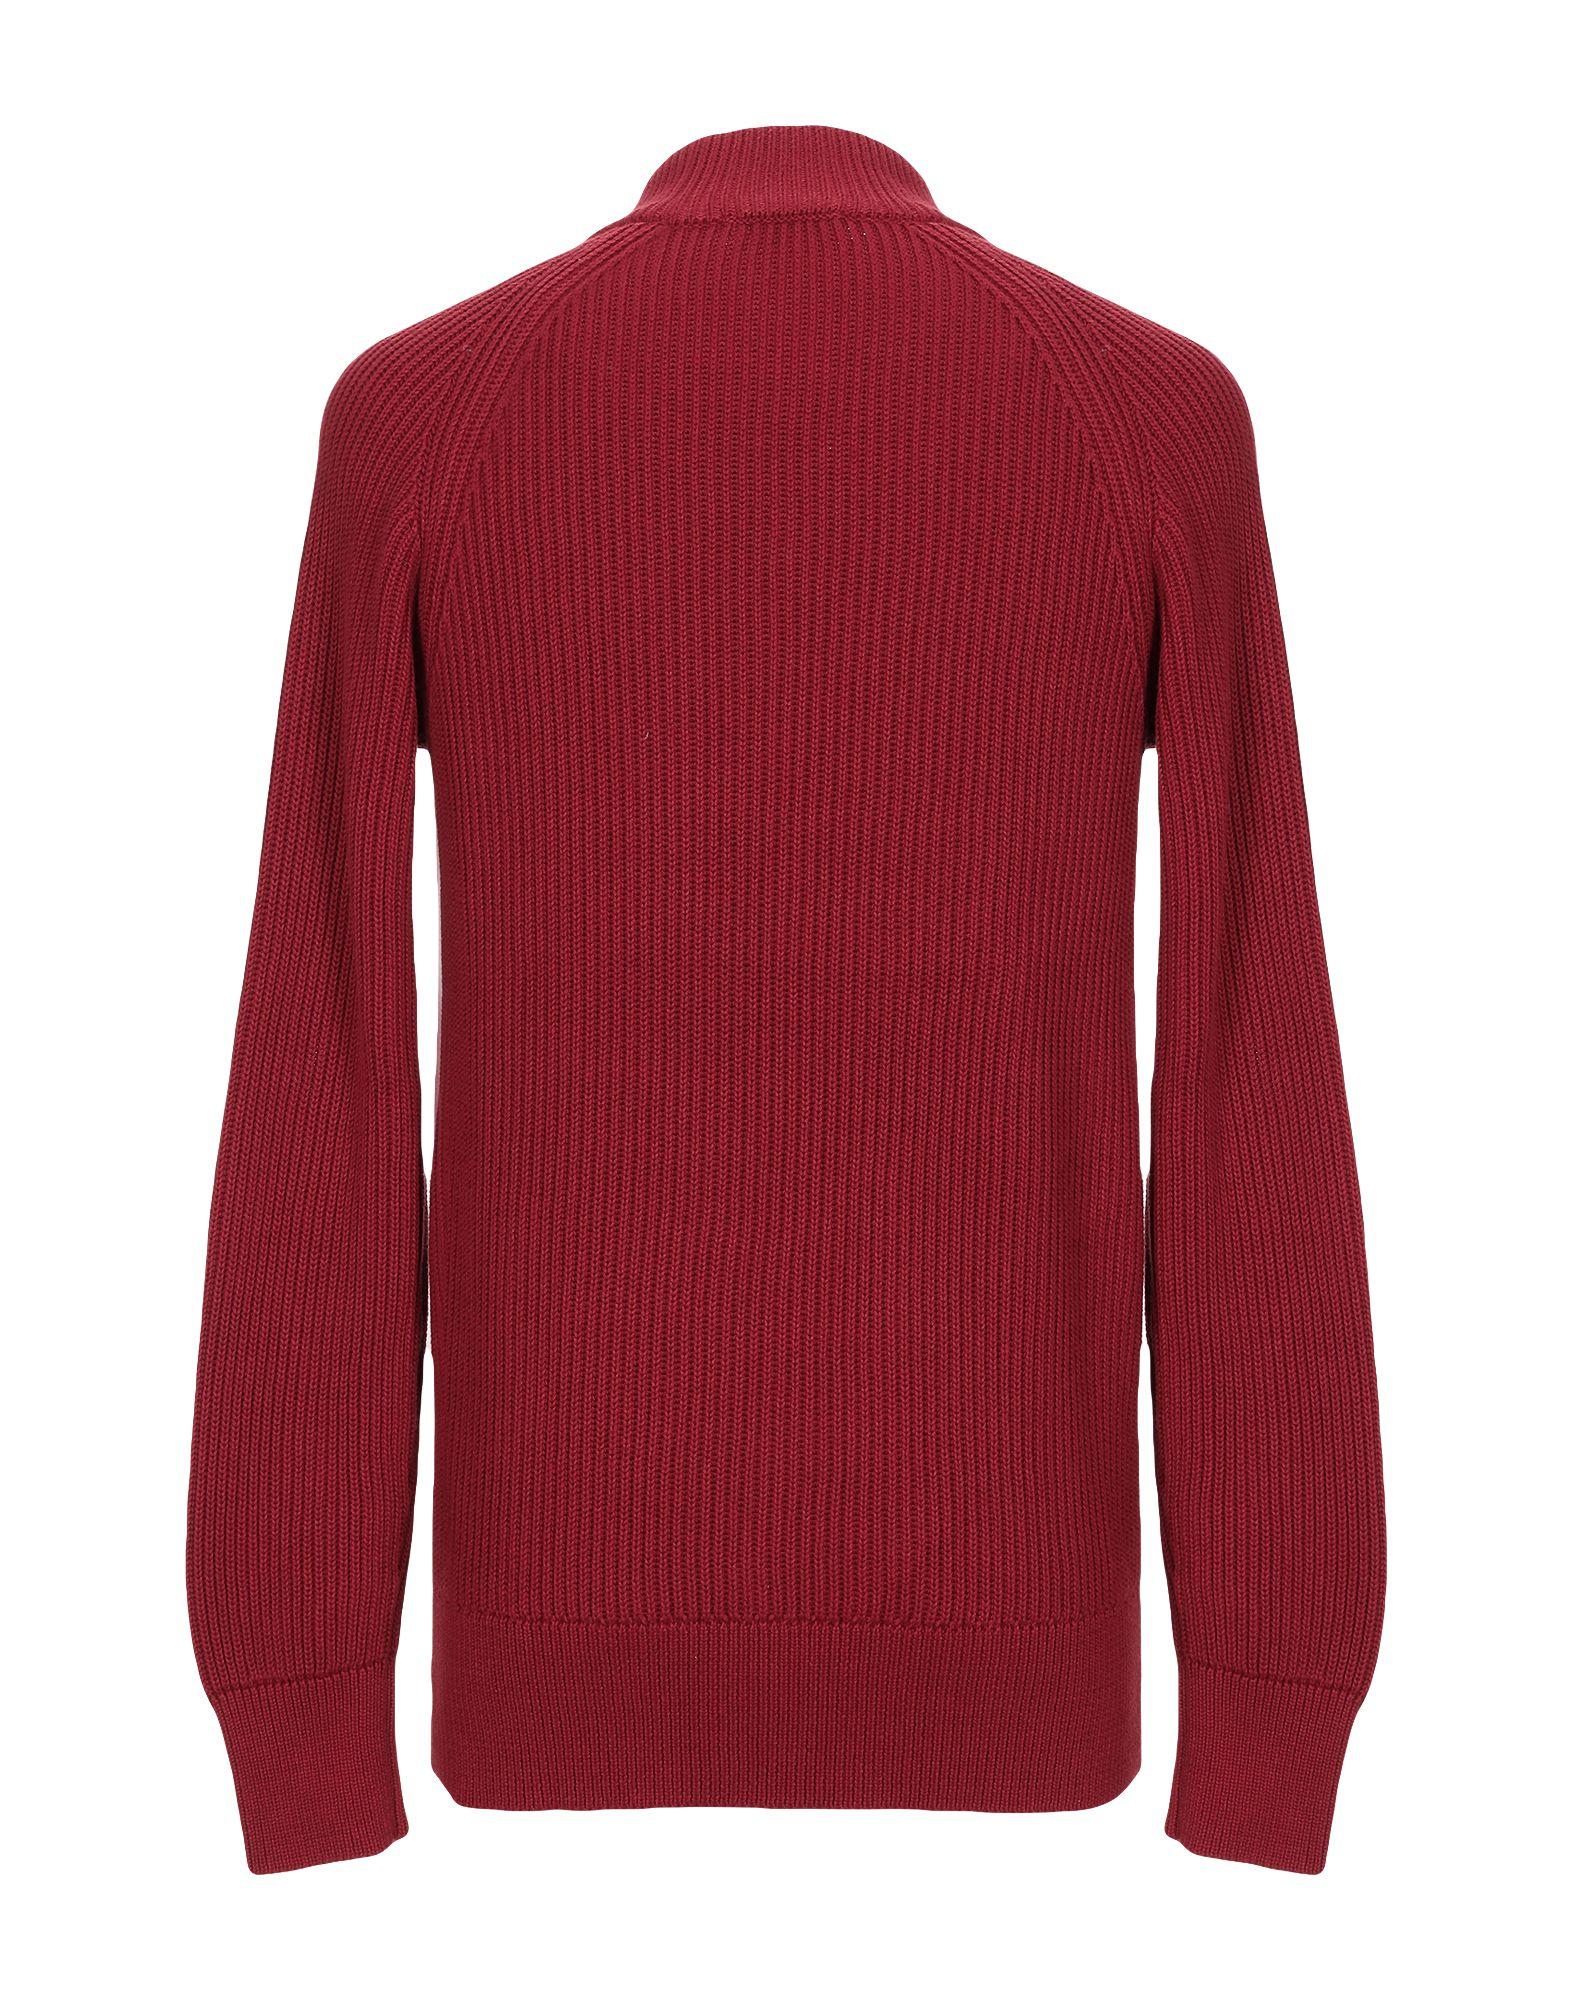 SELECTED Cotton Turtleneck in Maroon (Red) for Men - Lyst